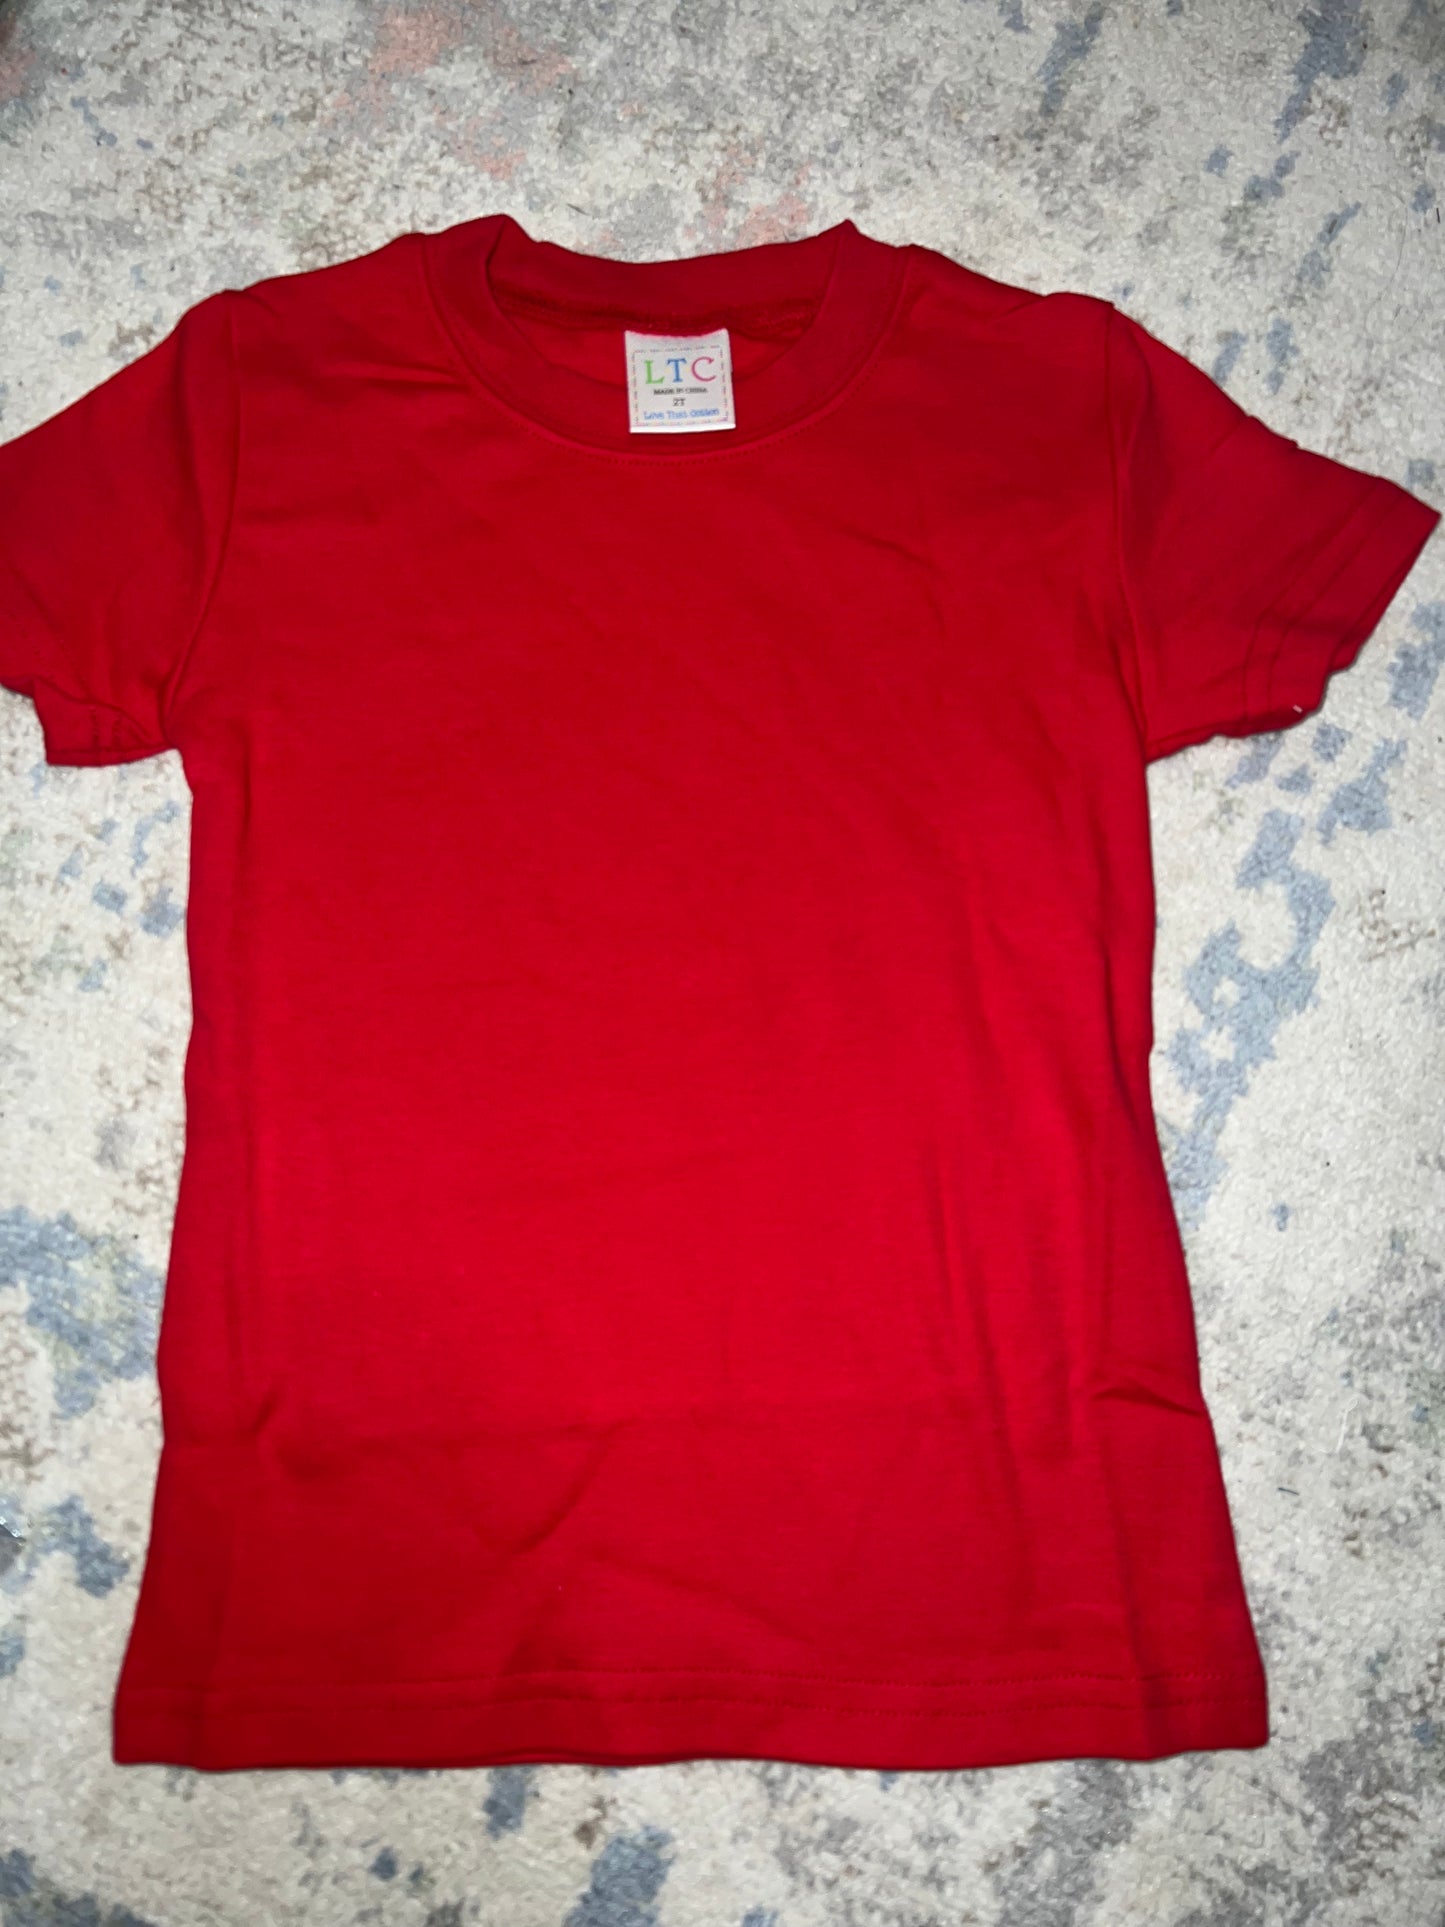 Rts-red t shirt